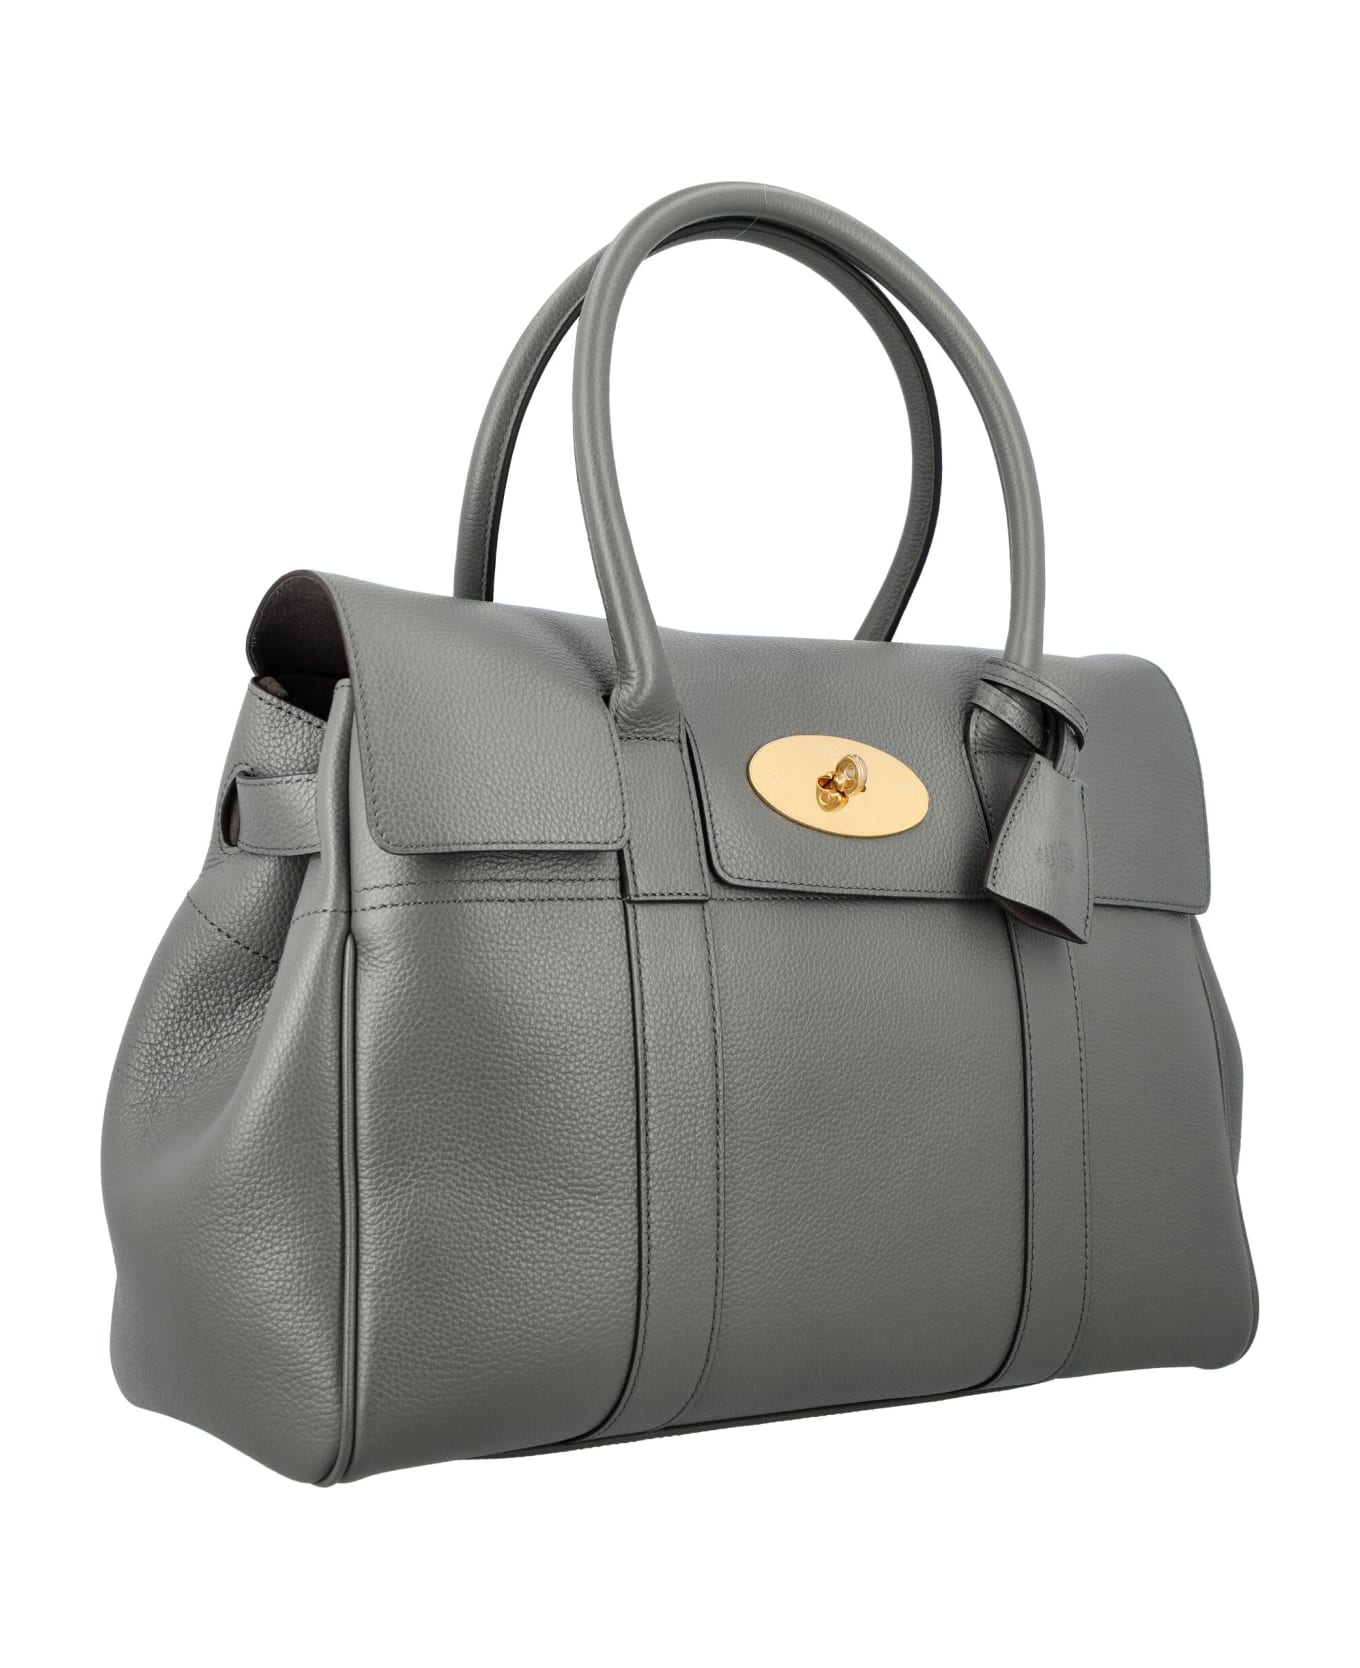 Mulberry Bayswater - CHARCOAL トートバッグ